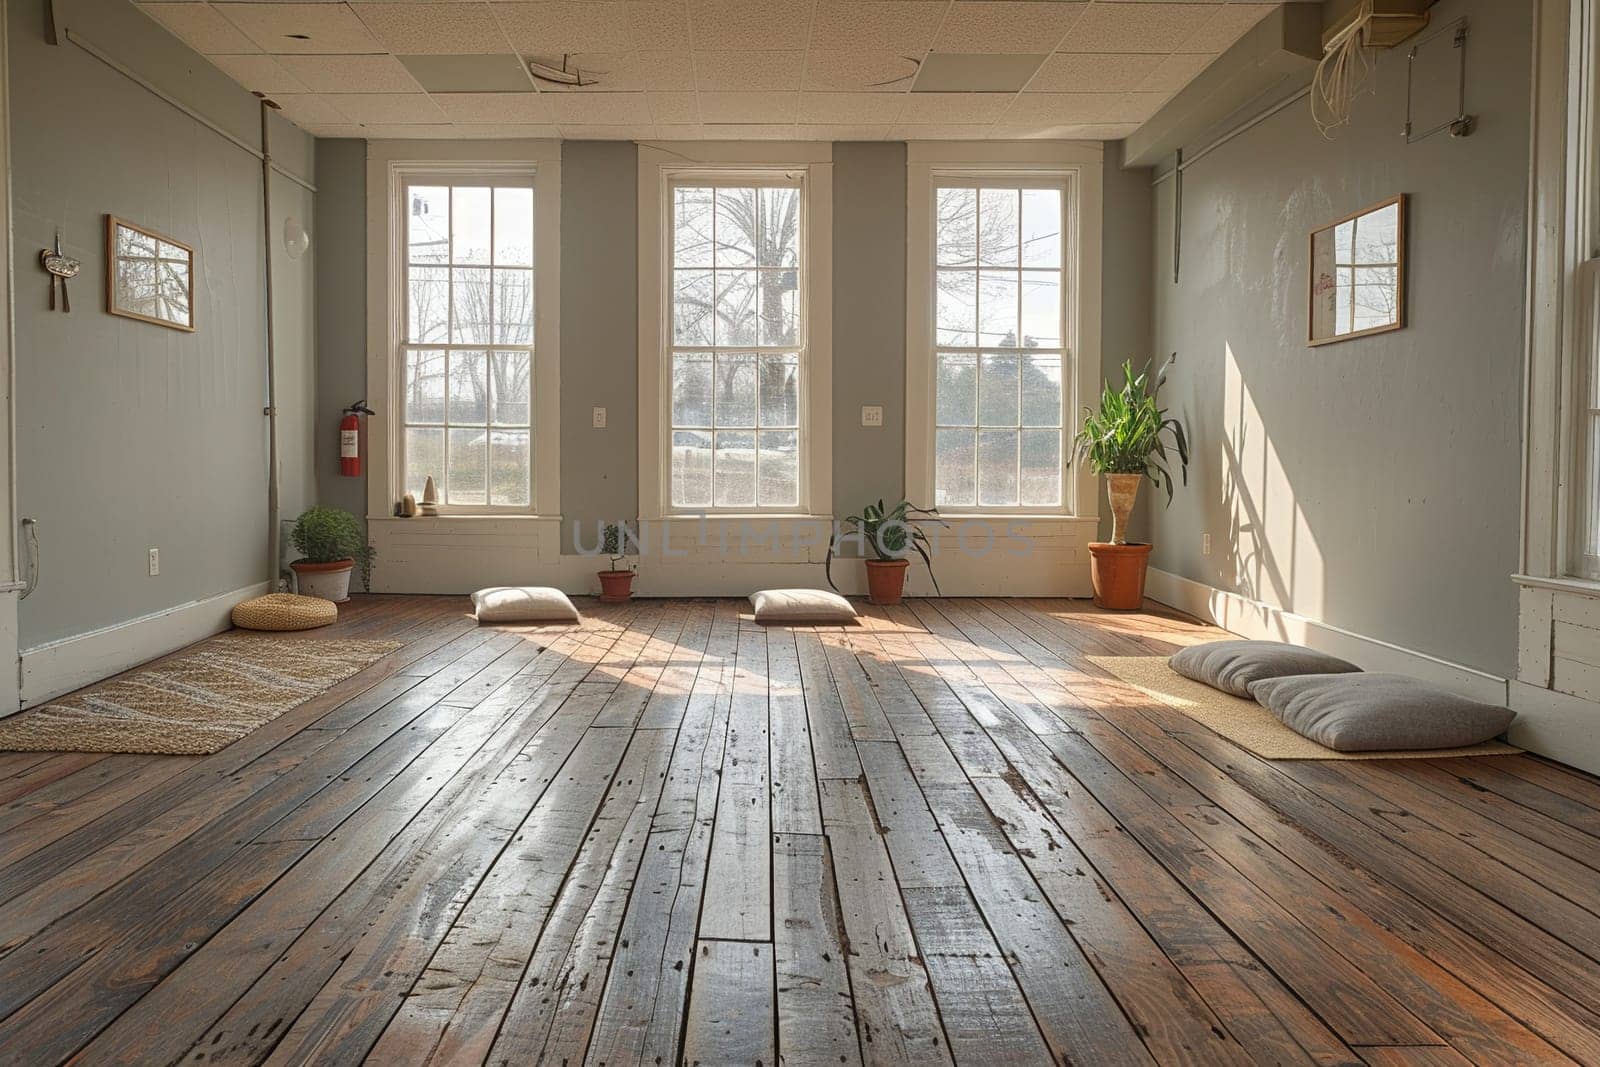 Peaceful yoga studio with natural wood floors and calming colors